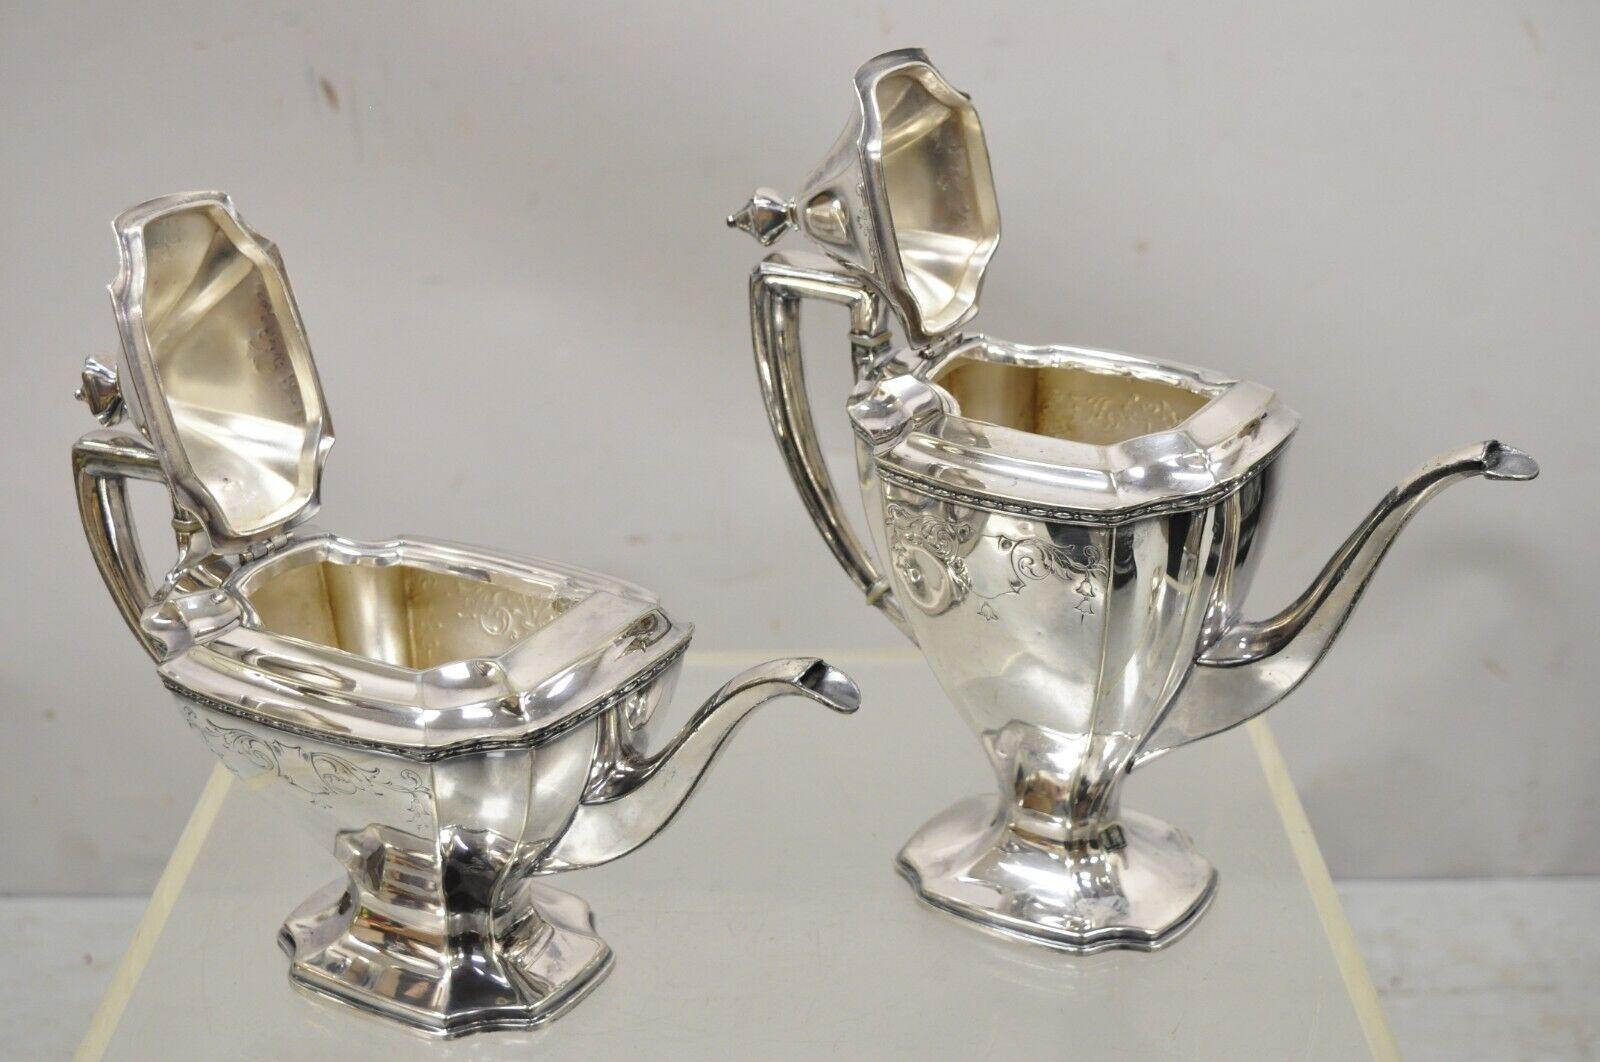 WD Smith Silver Co Chippendale EPNS Hepplewhite Silver Plated Tea Set - 4 pcs For Sale 1